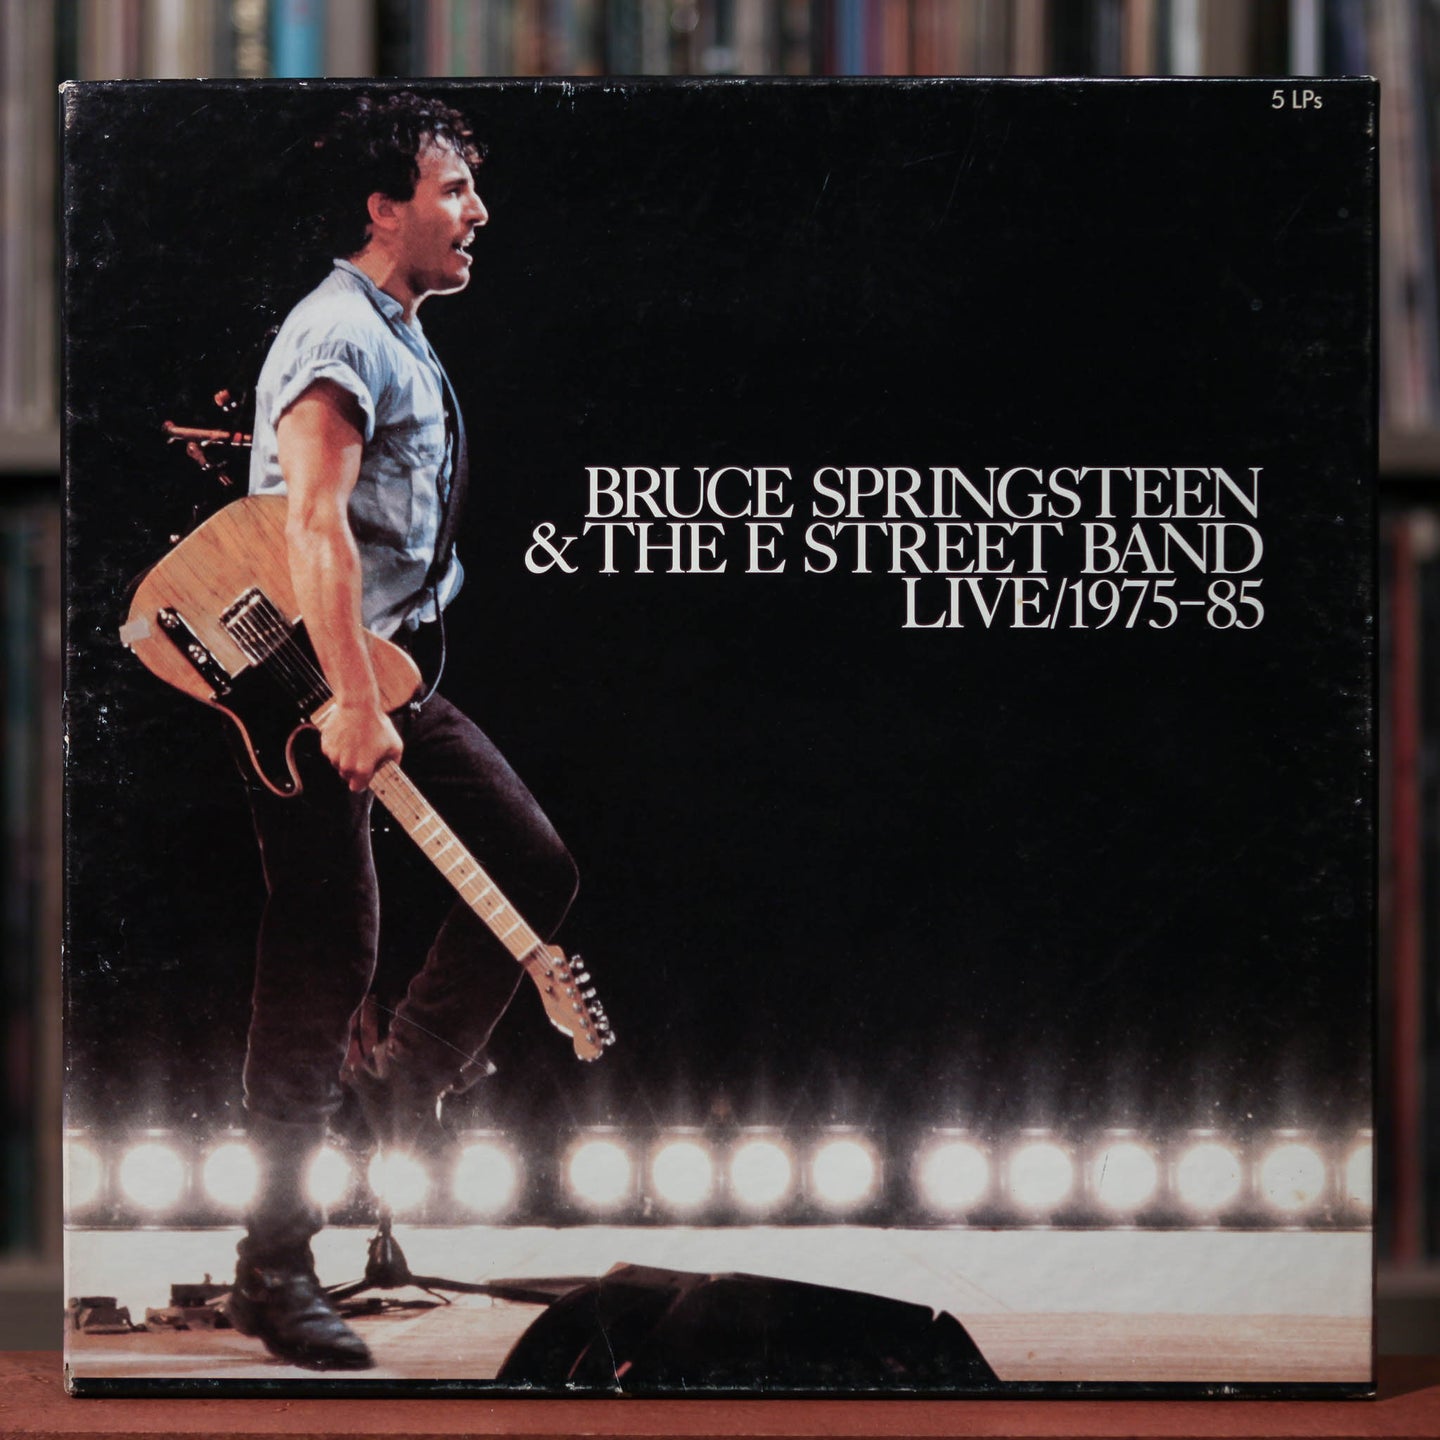 Bruce Springsteen & The E Street Band - 5LP LIVE/1975-85 - 1986 Columbia, VG+/VG+